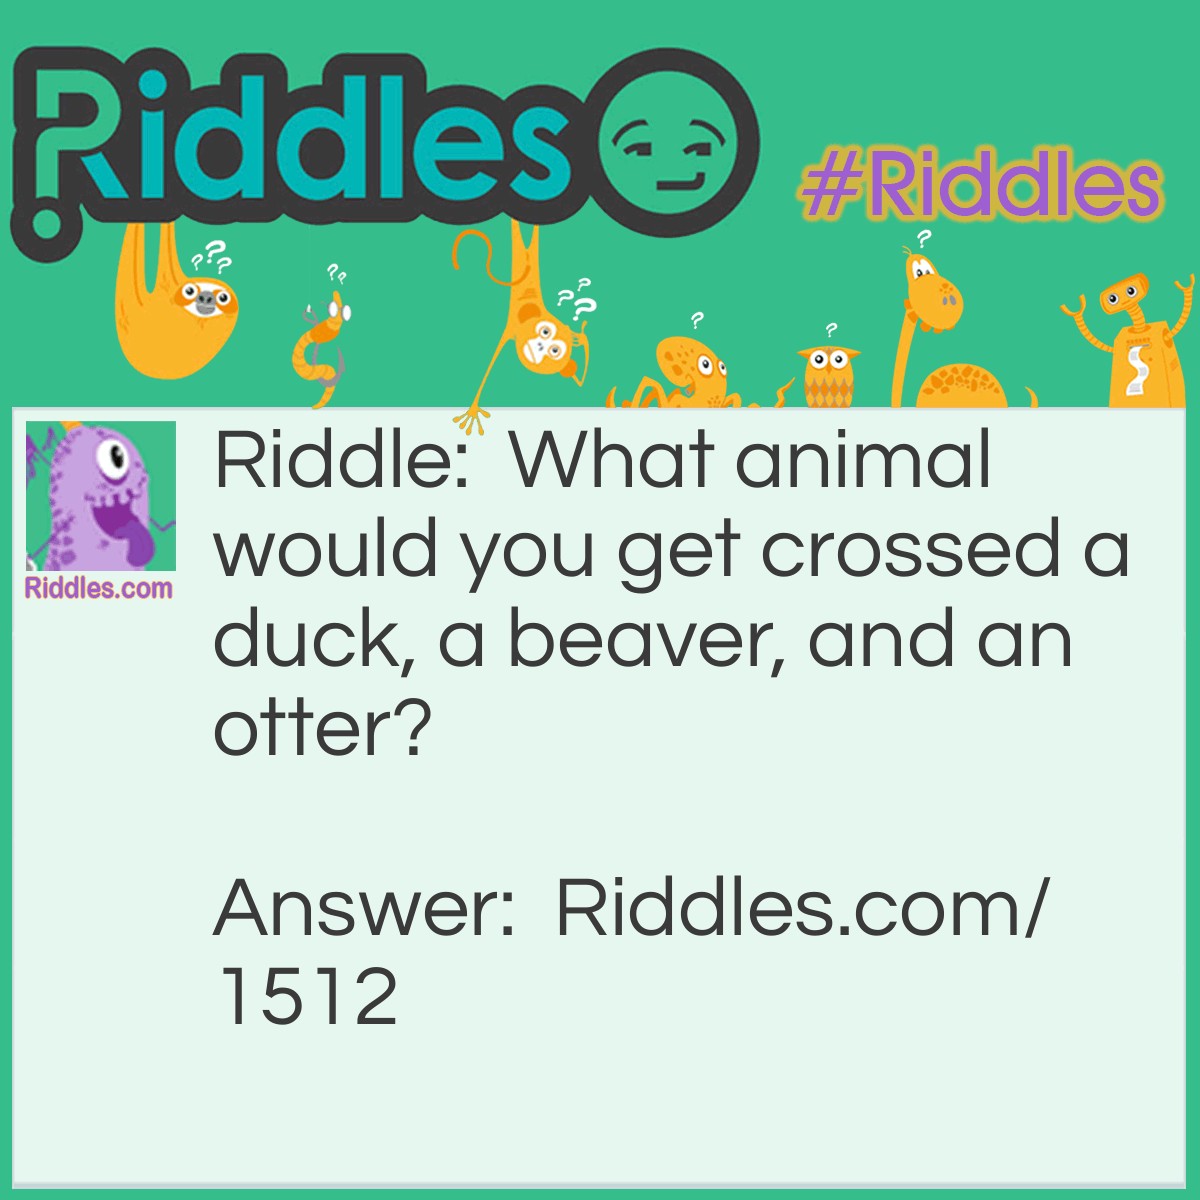 Riddle: What animal would you get crossed a duck, a beaver, and an otter? Answer: A platypus.